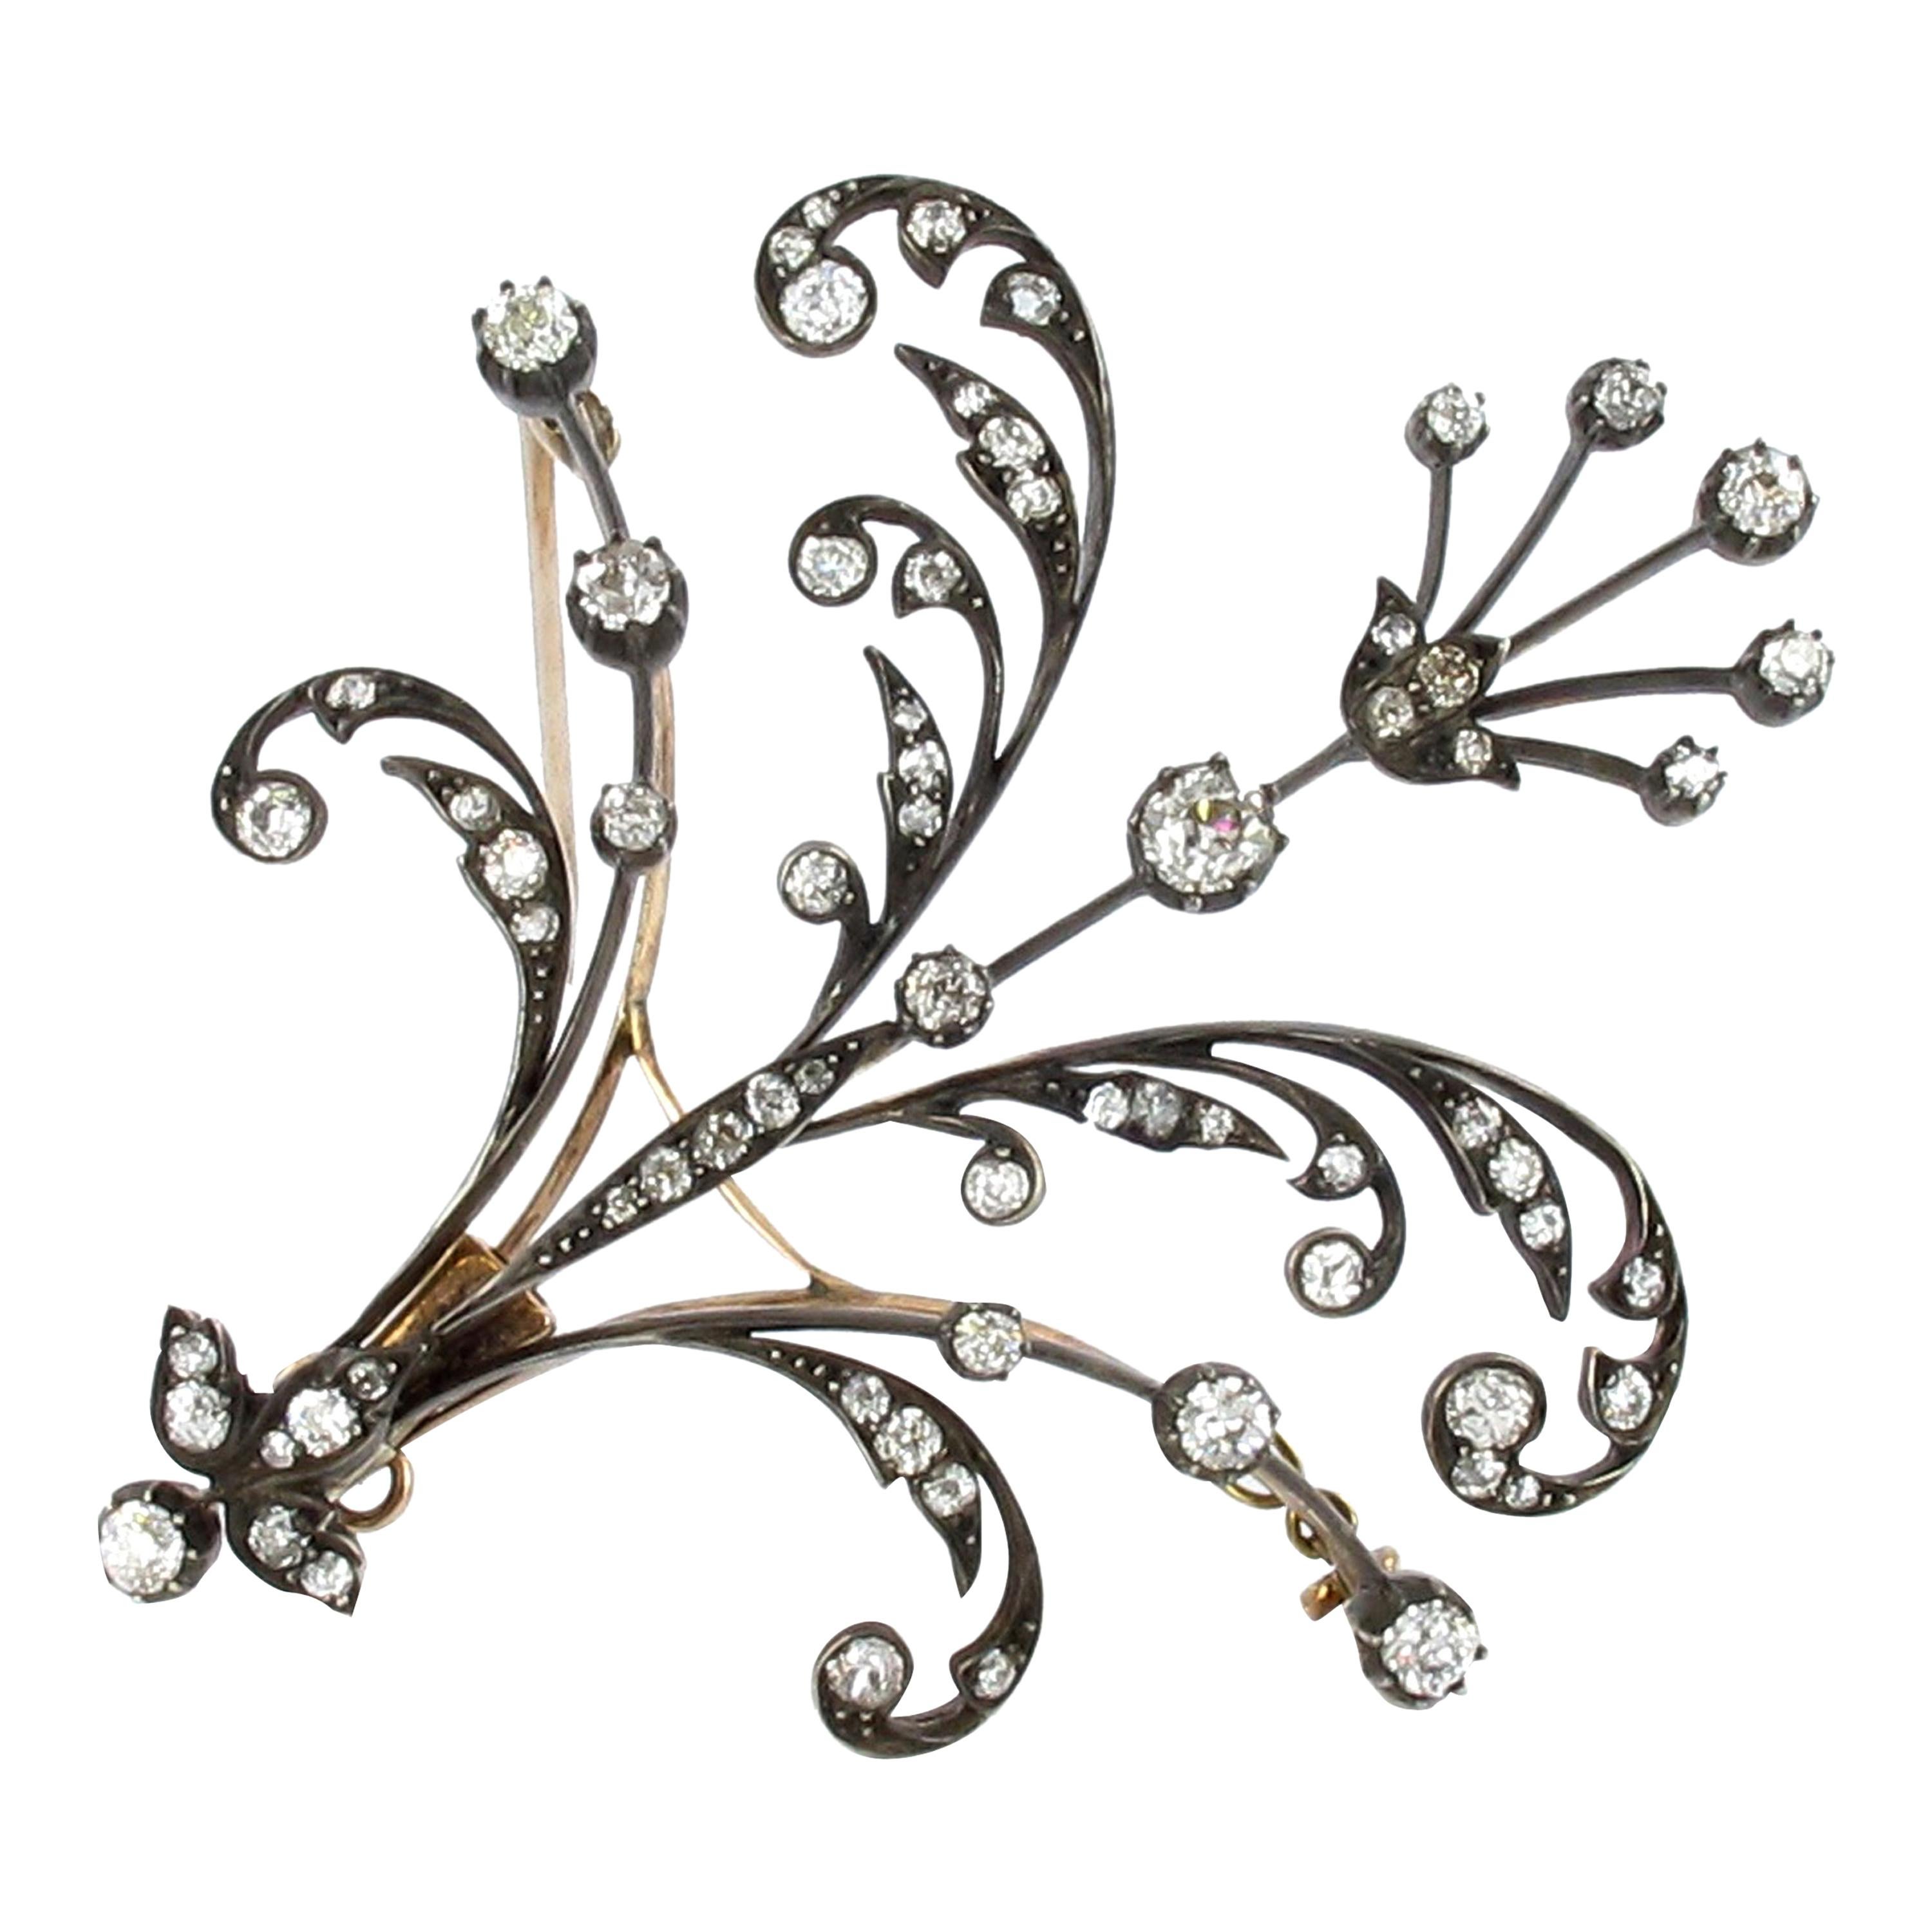 Victorian Silver-Topped Gold and Diamond Brooch